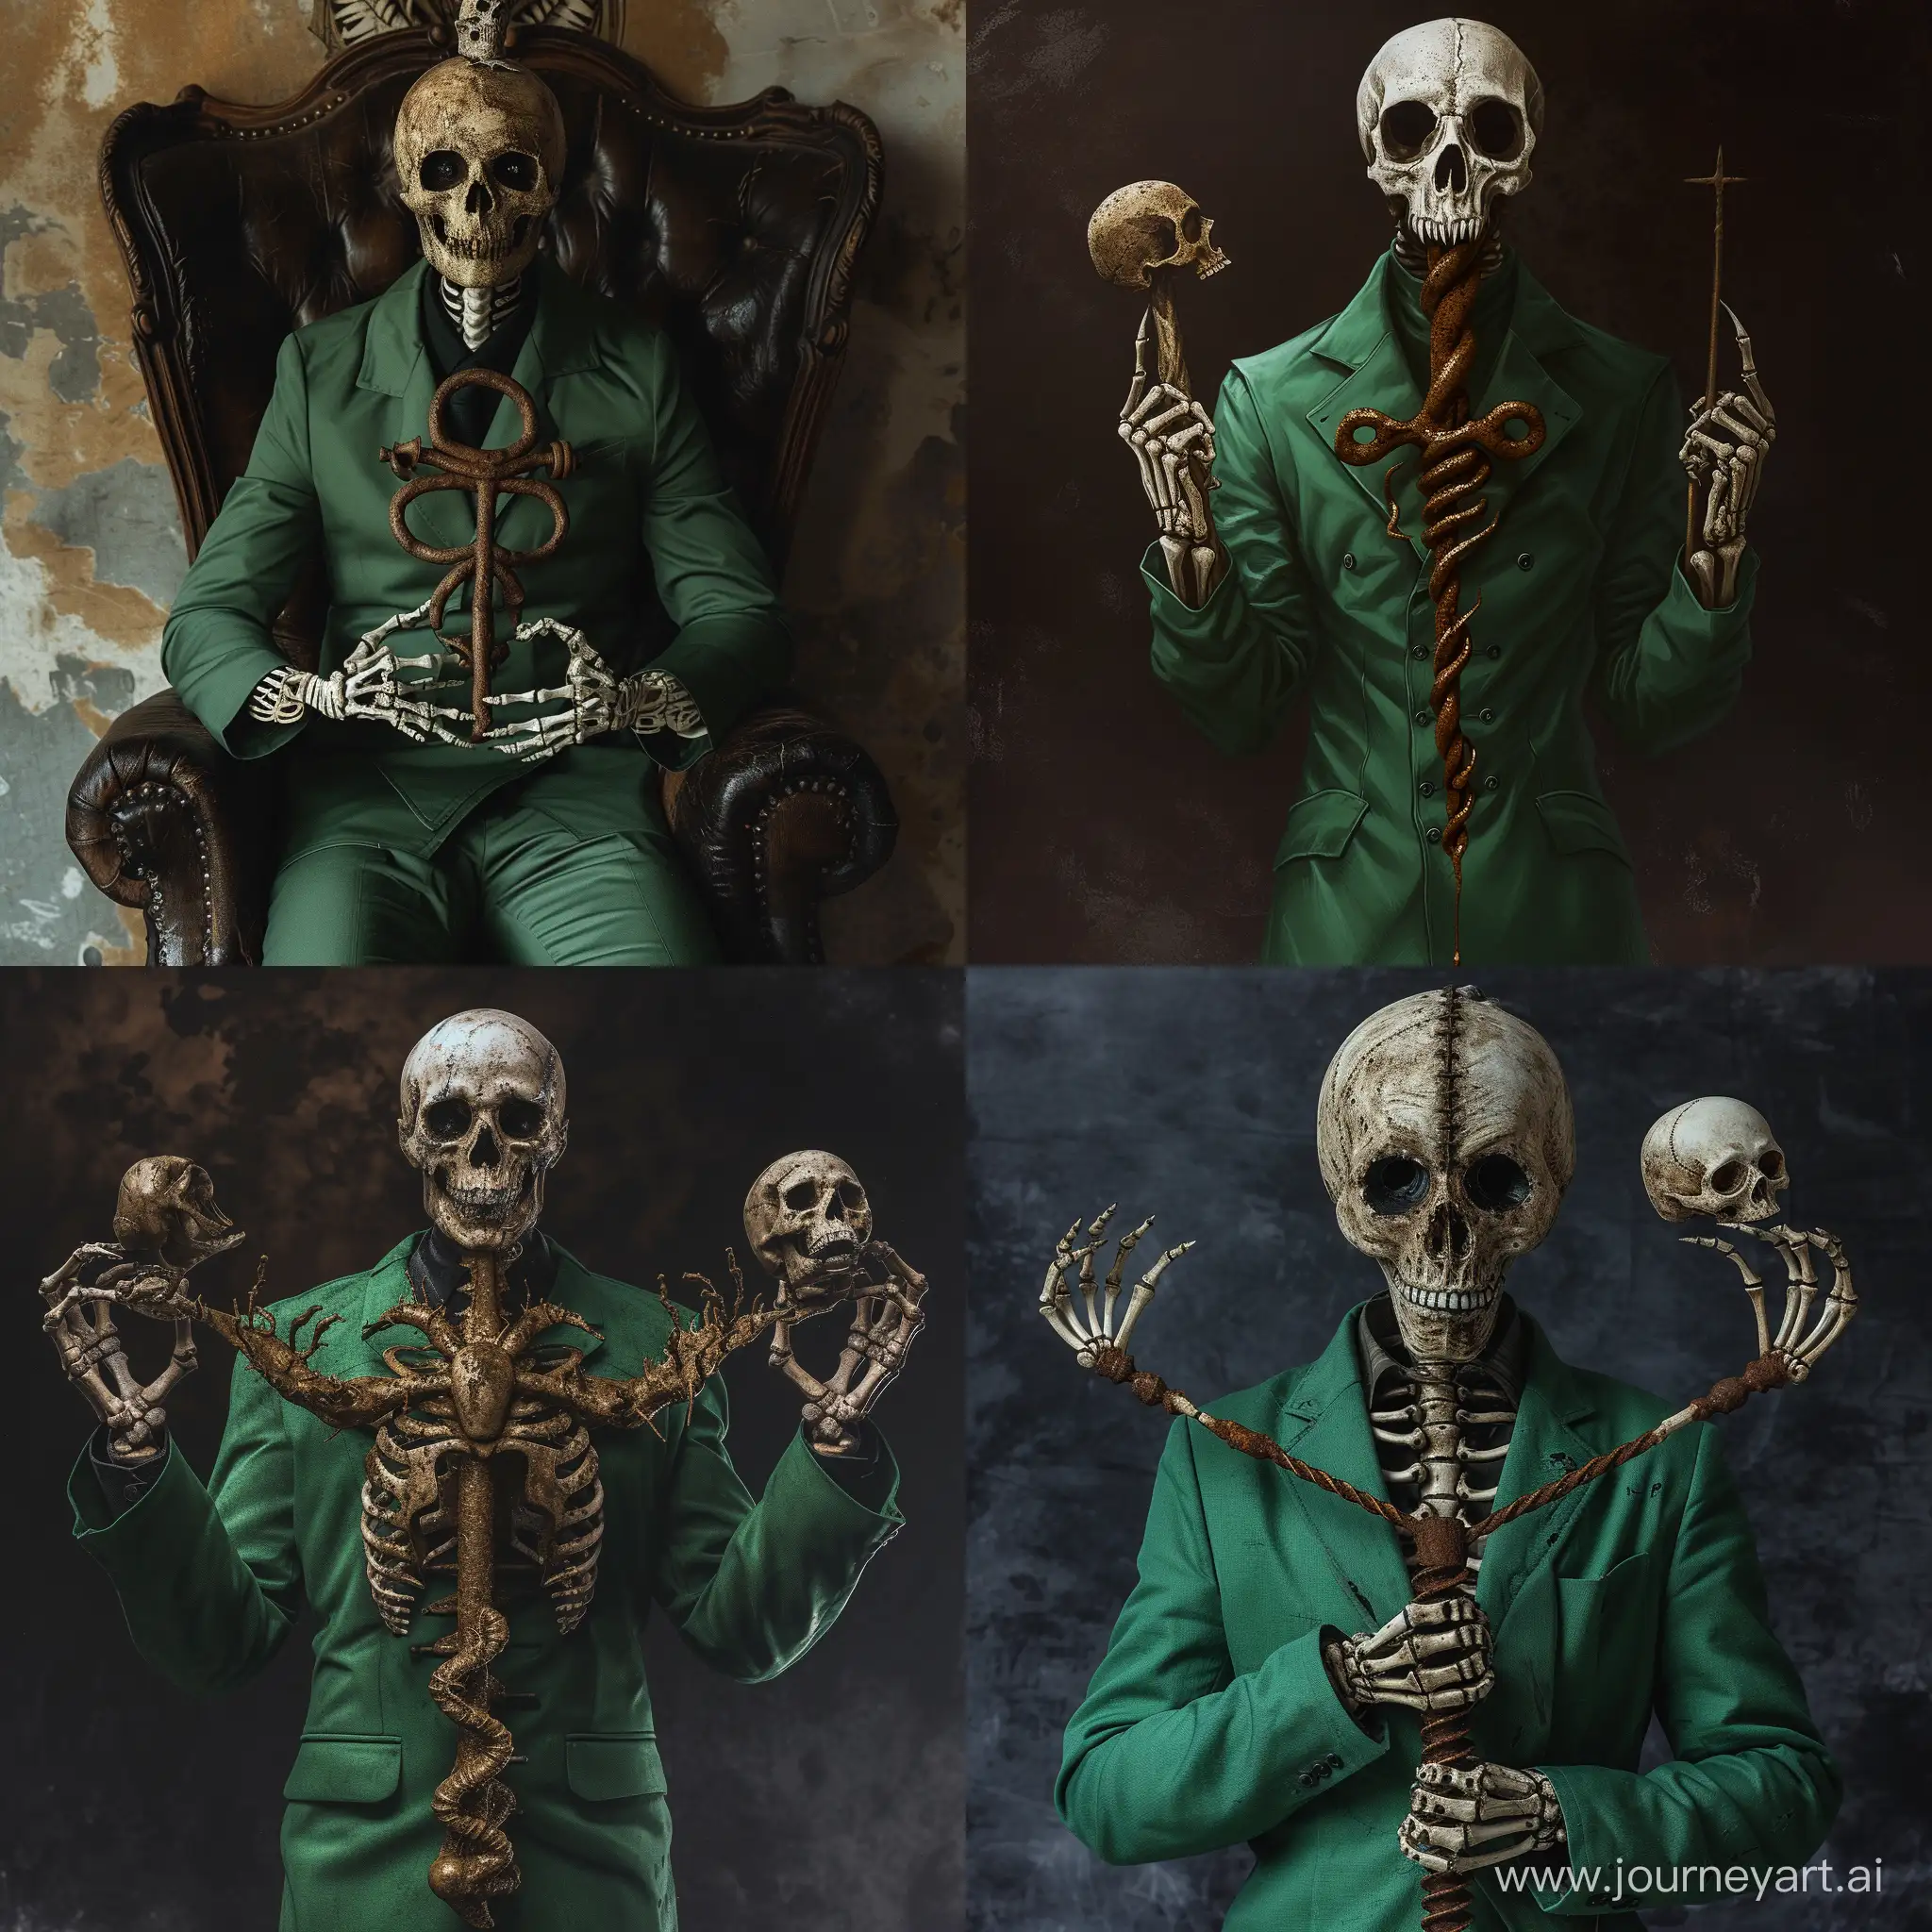 Horseman of Apocalypse Plague, wear a green suite, and helding in skeleton like hands rusty Caduceus with a skull on top
